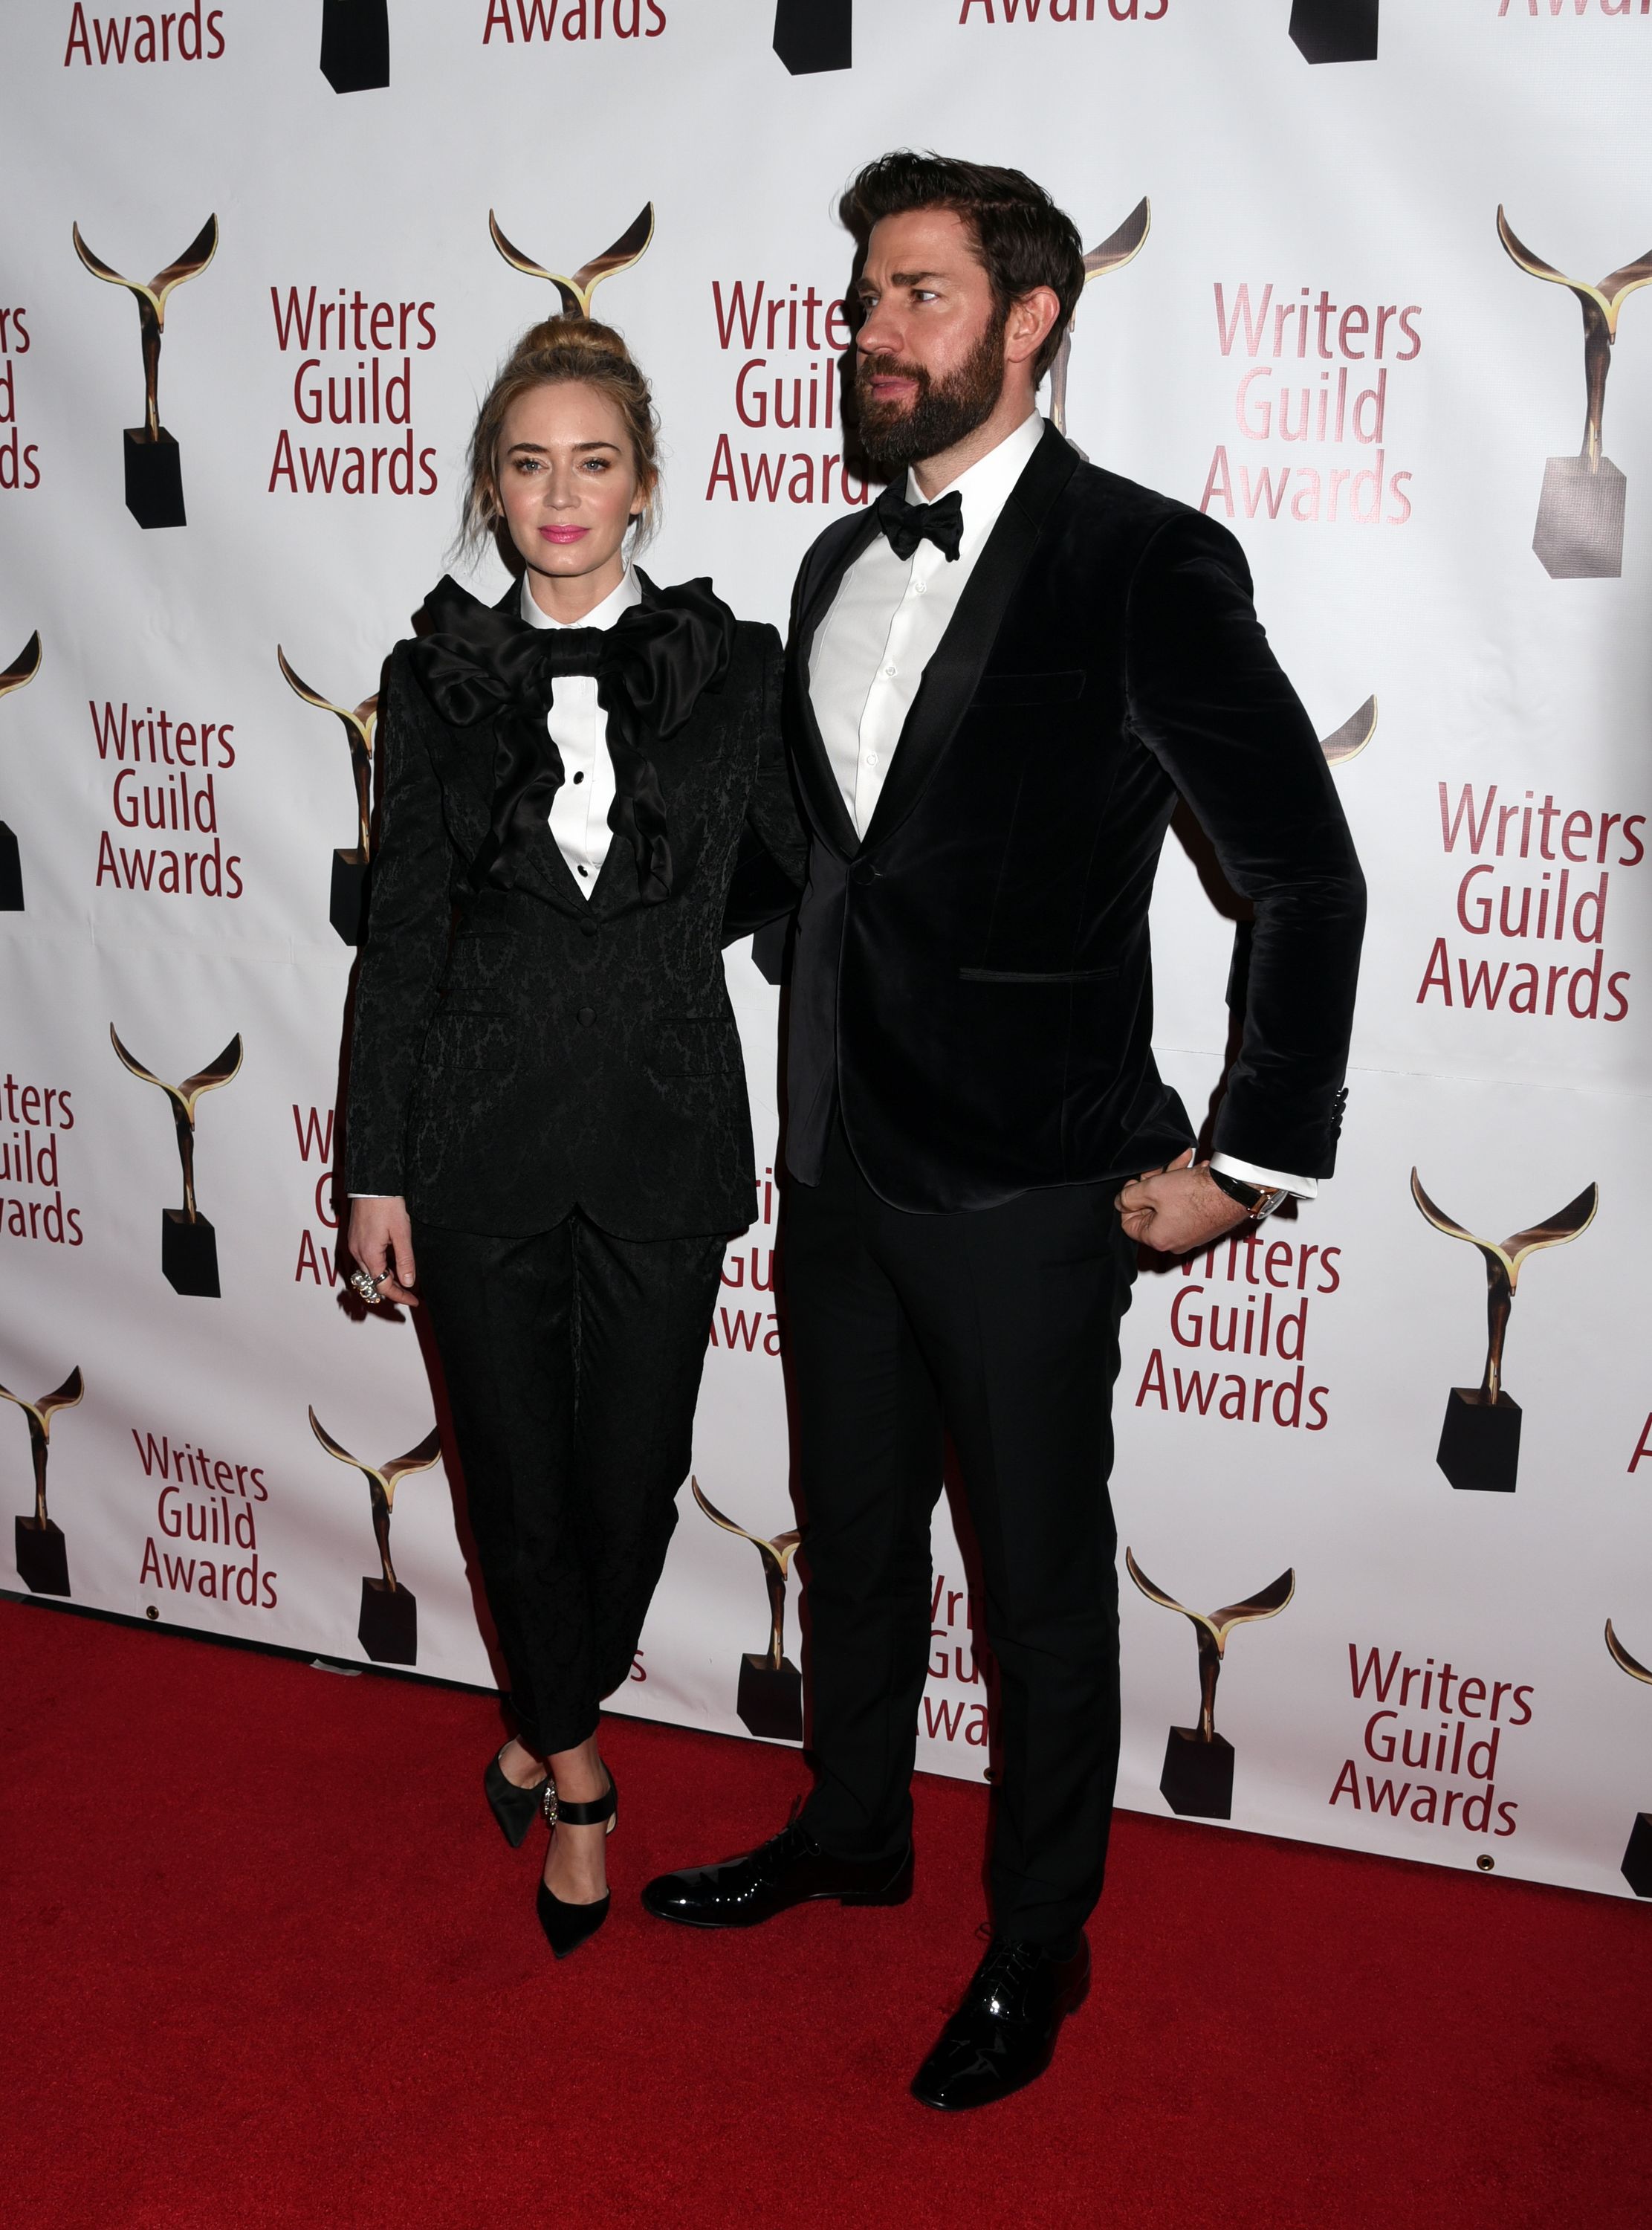 2019-02-17-71st-Annual-Writers-Guild-Awards-128.jpg